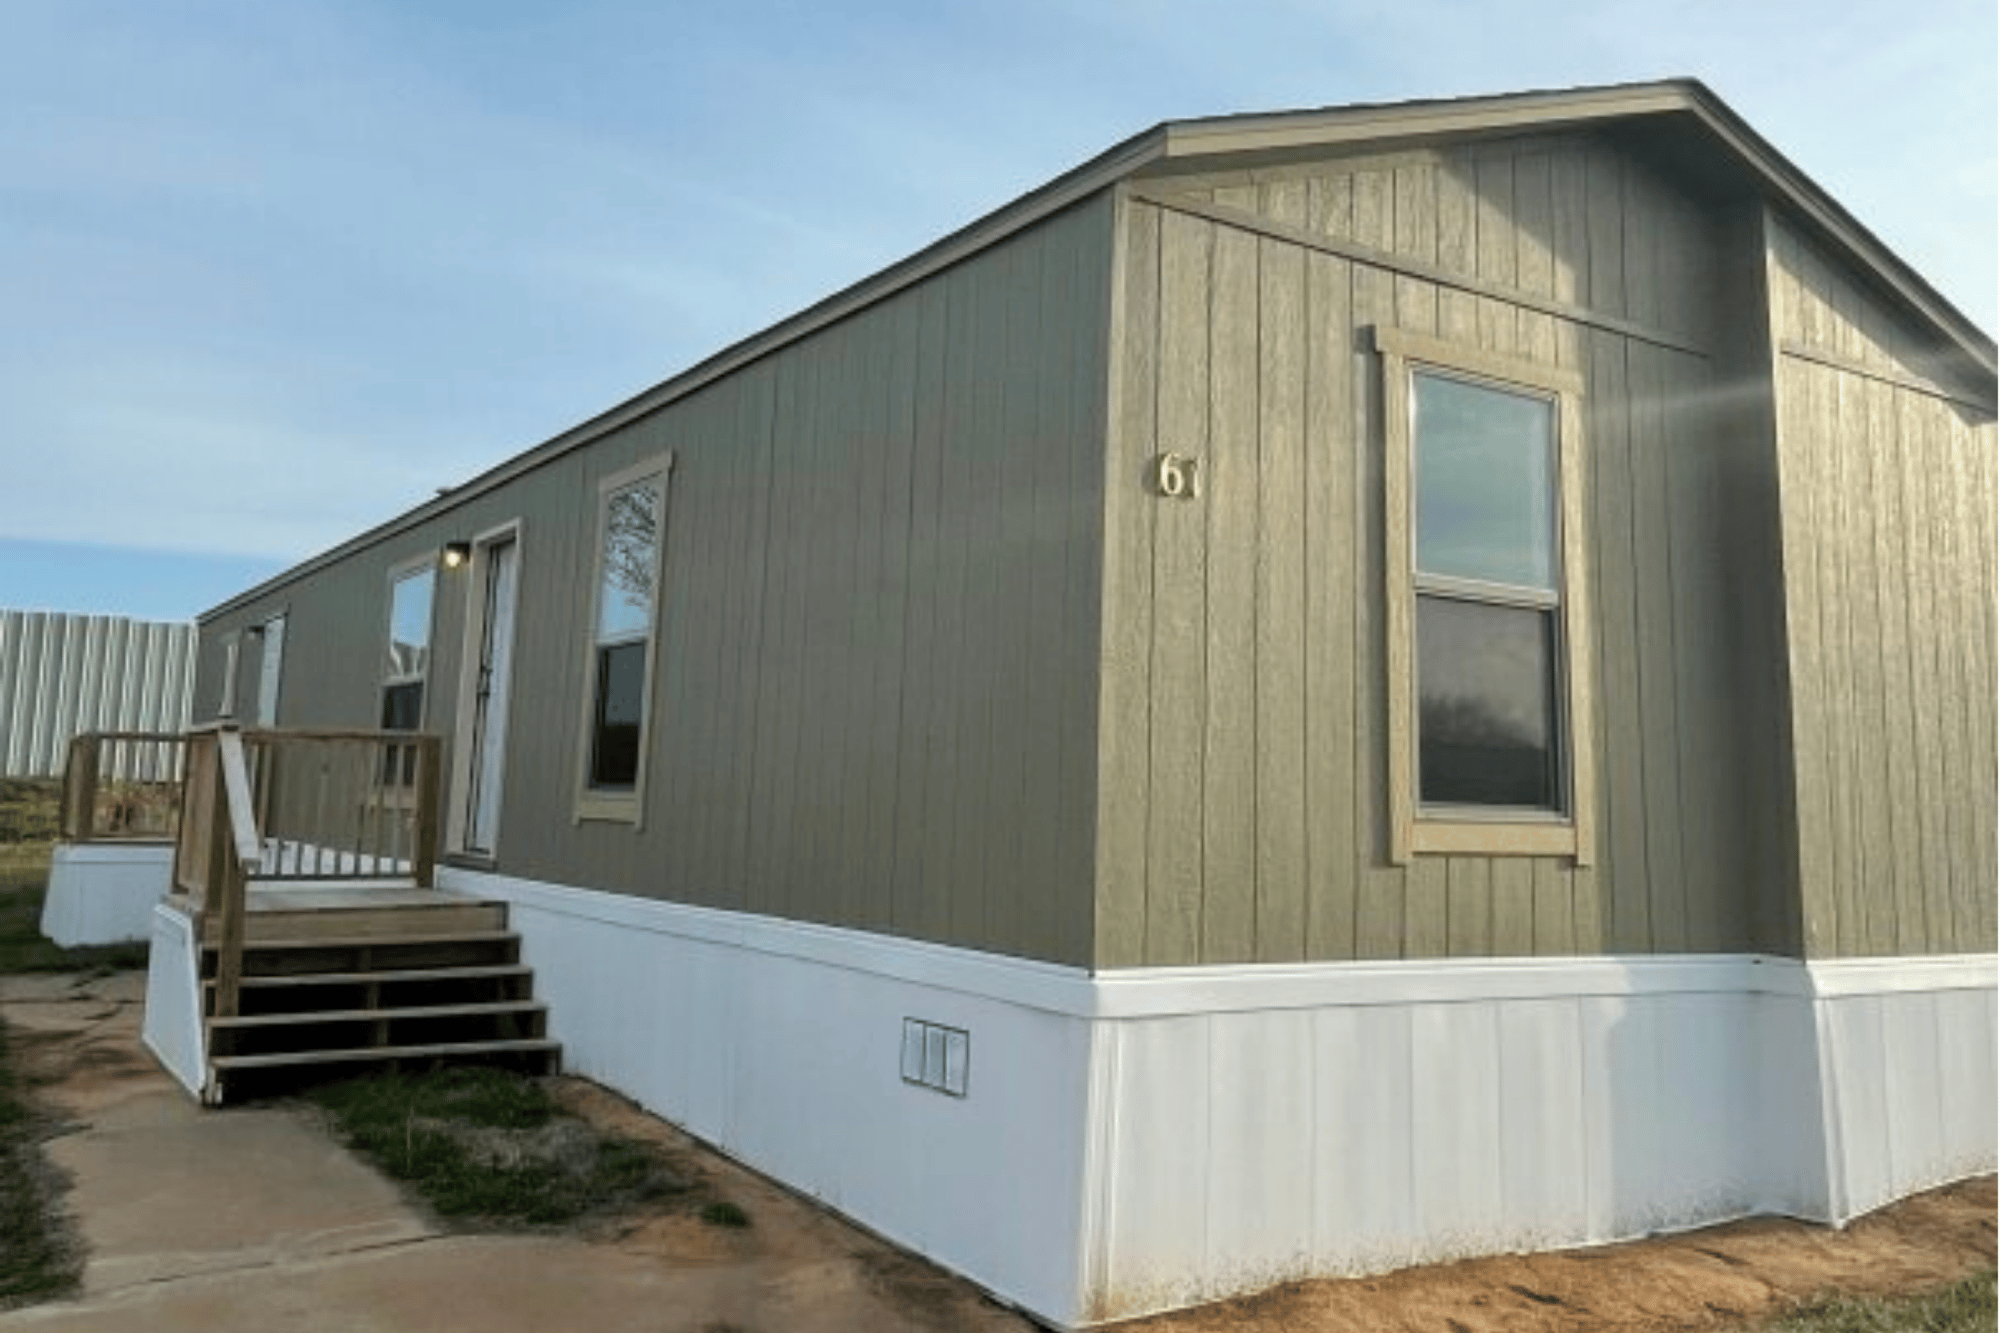 Sunnyvale Estates Manufactured Home Exterior in Manufactured Housing Community